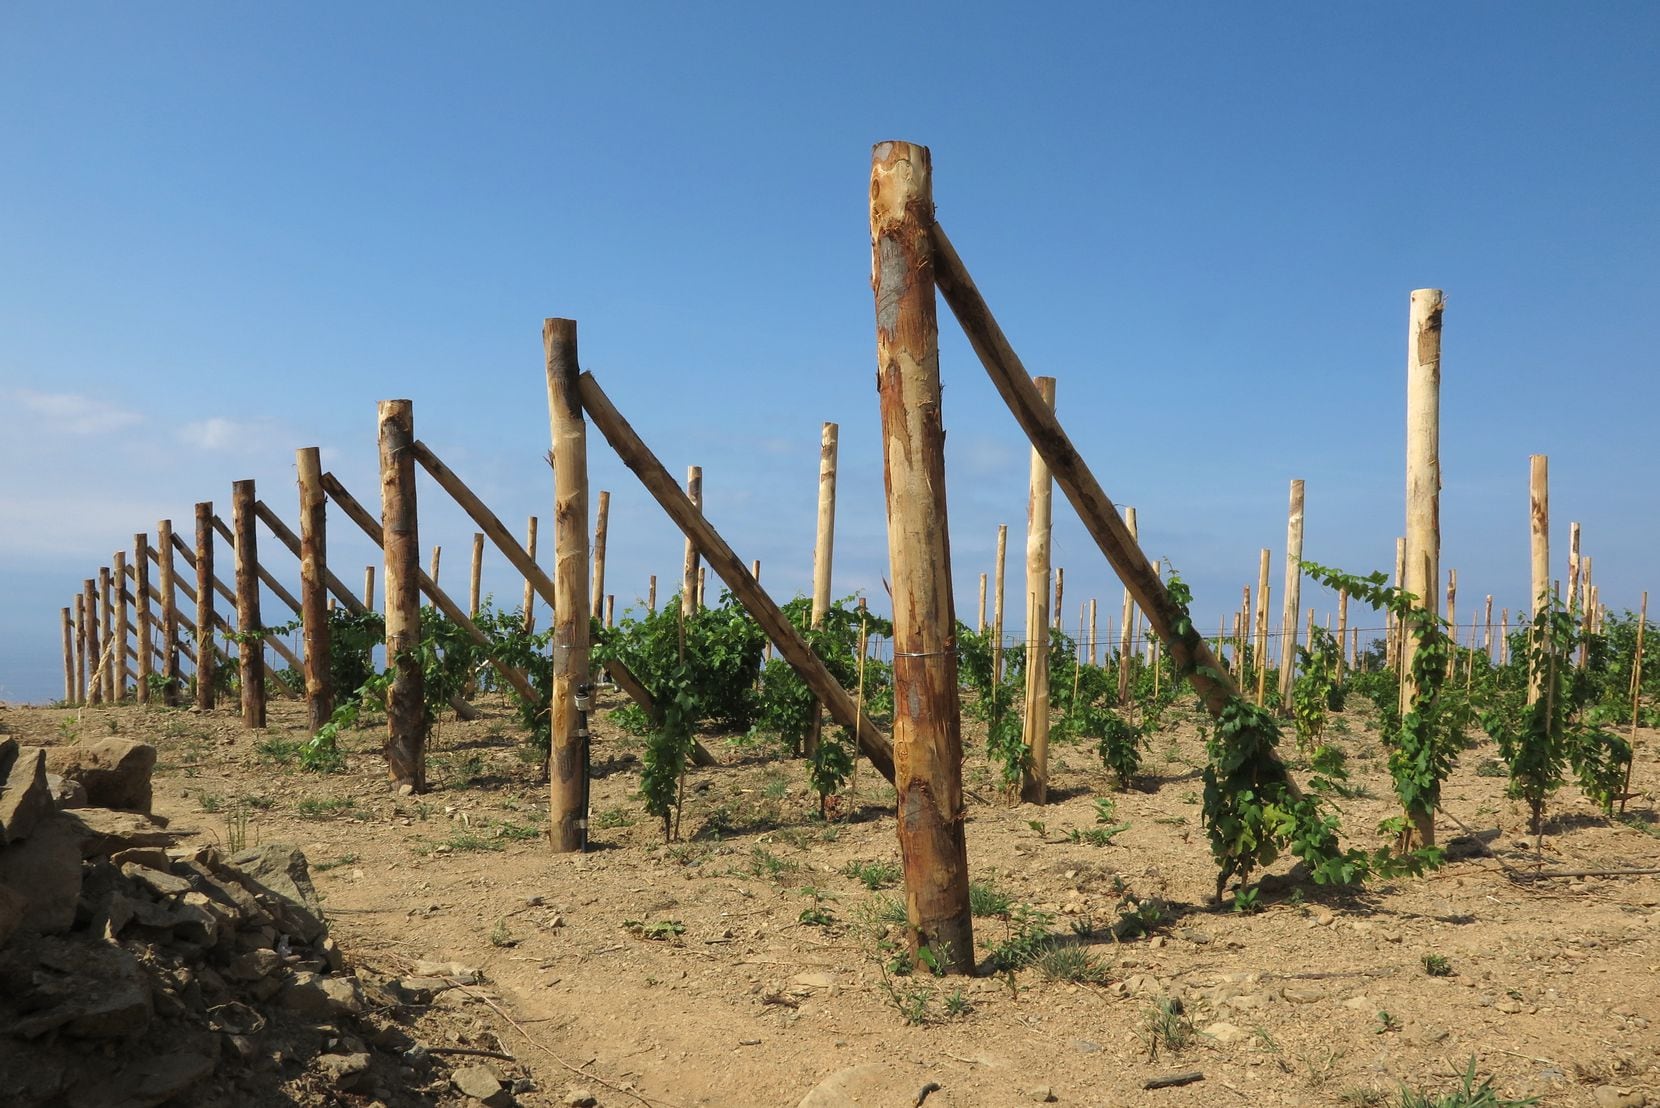 Young vines high up in the Cinque Terre hills give hope that this Italian region's...